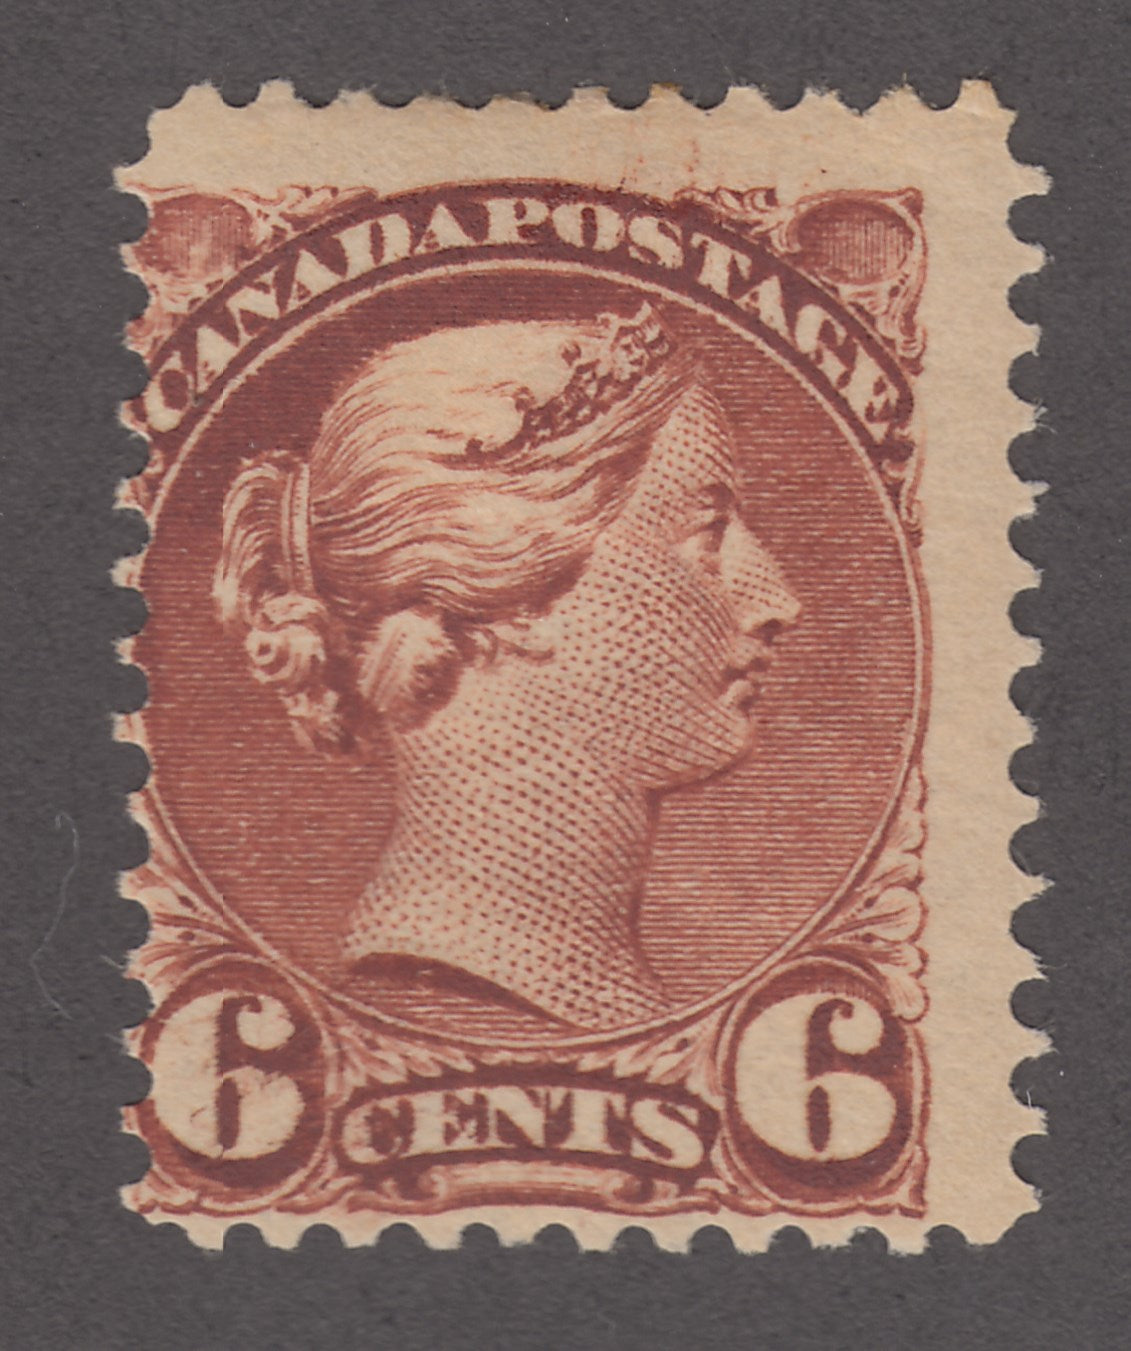 0043CA1802 - Canada #43 - Mint - UNLISTED Constant Variety?